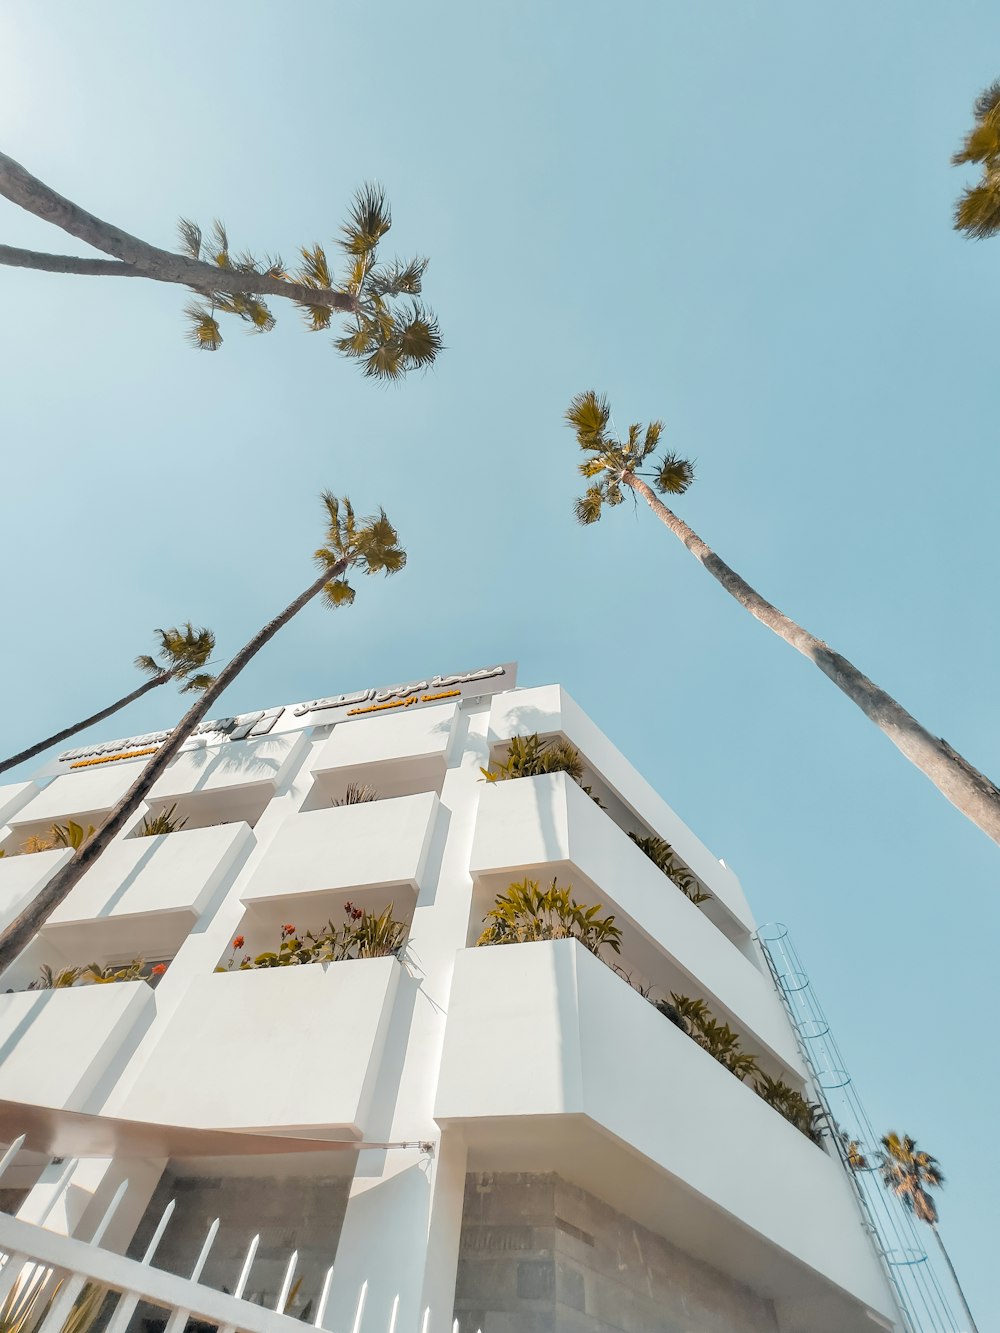 looking up at a tall white building with palm trees